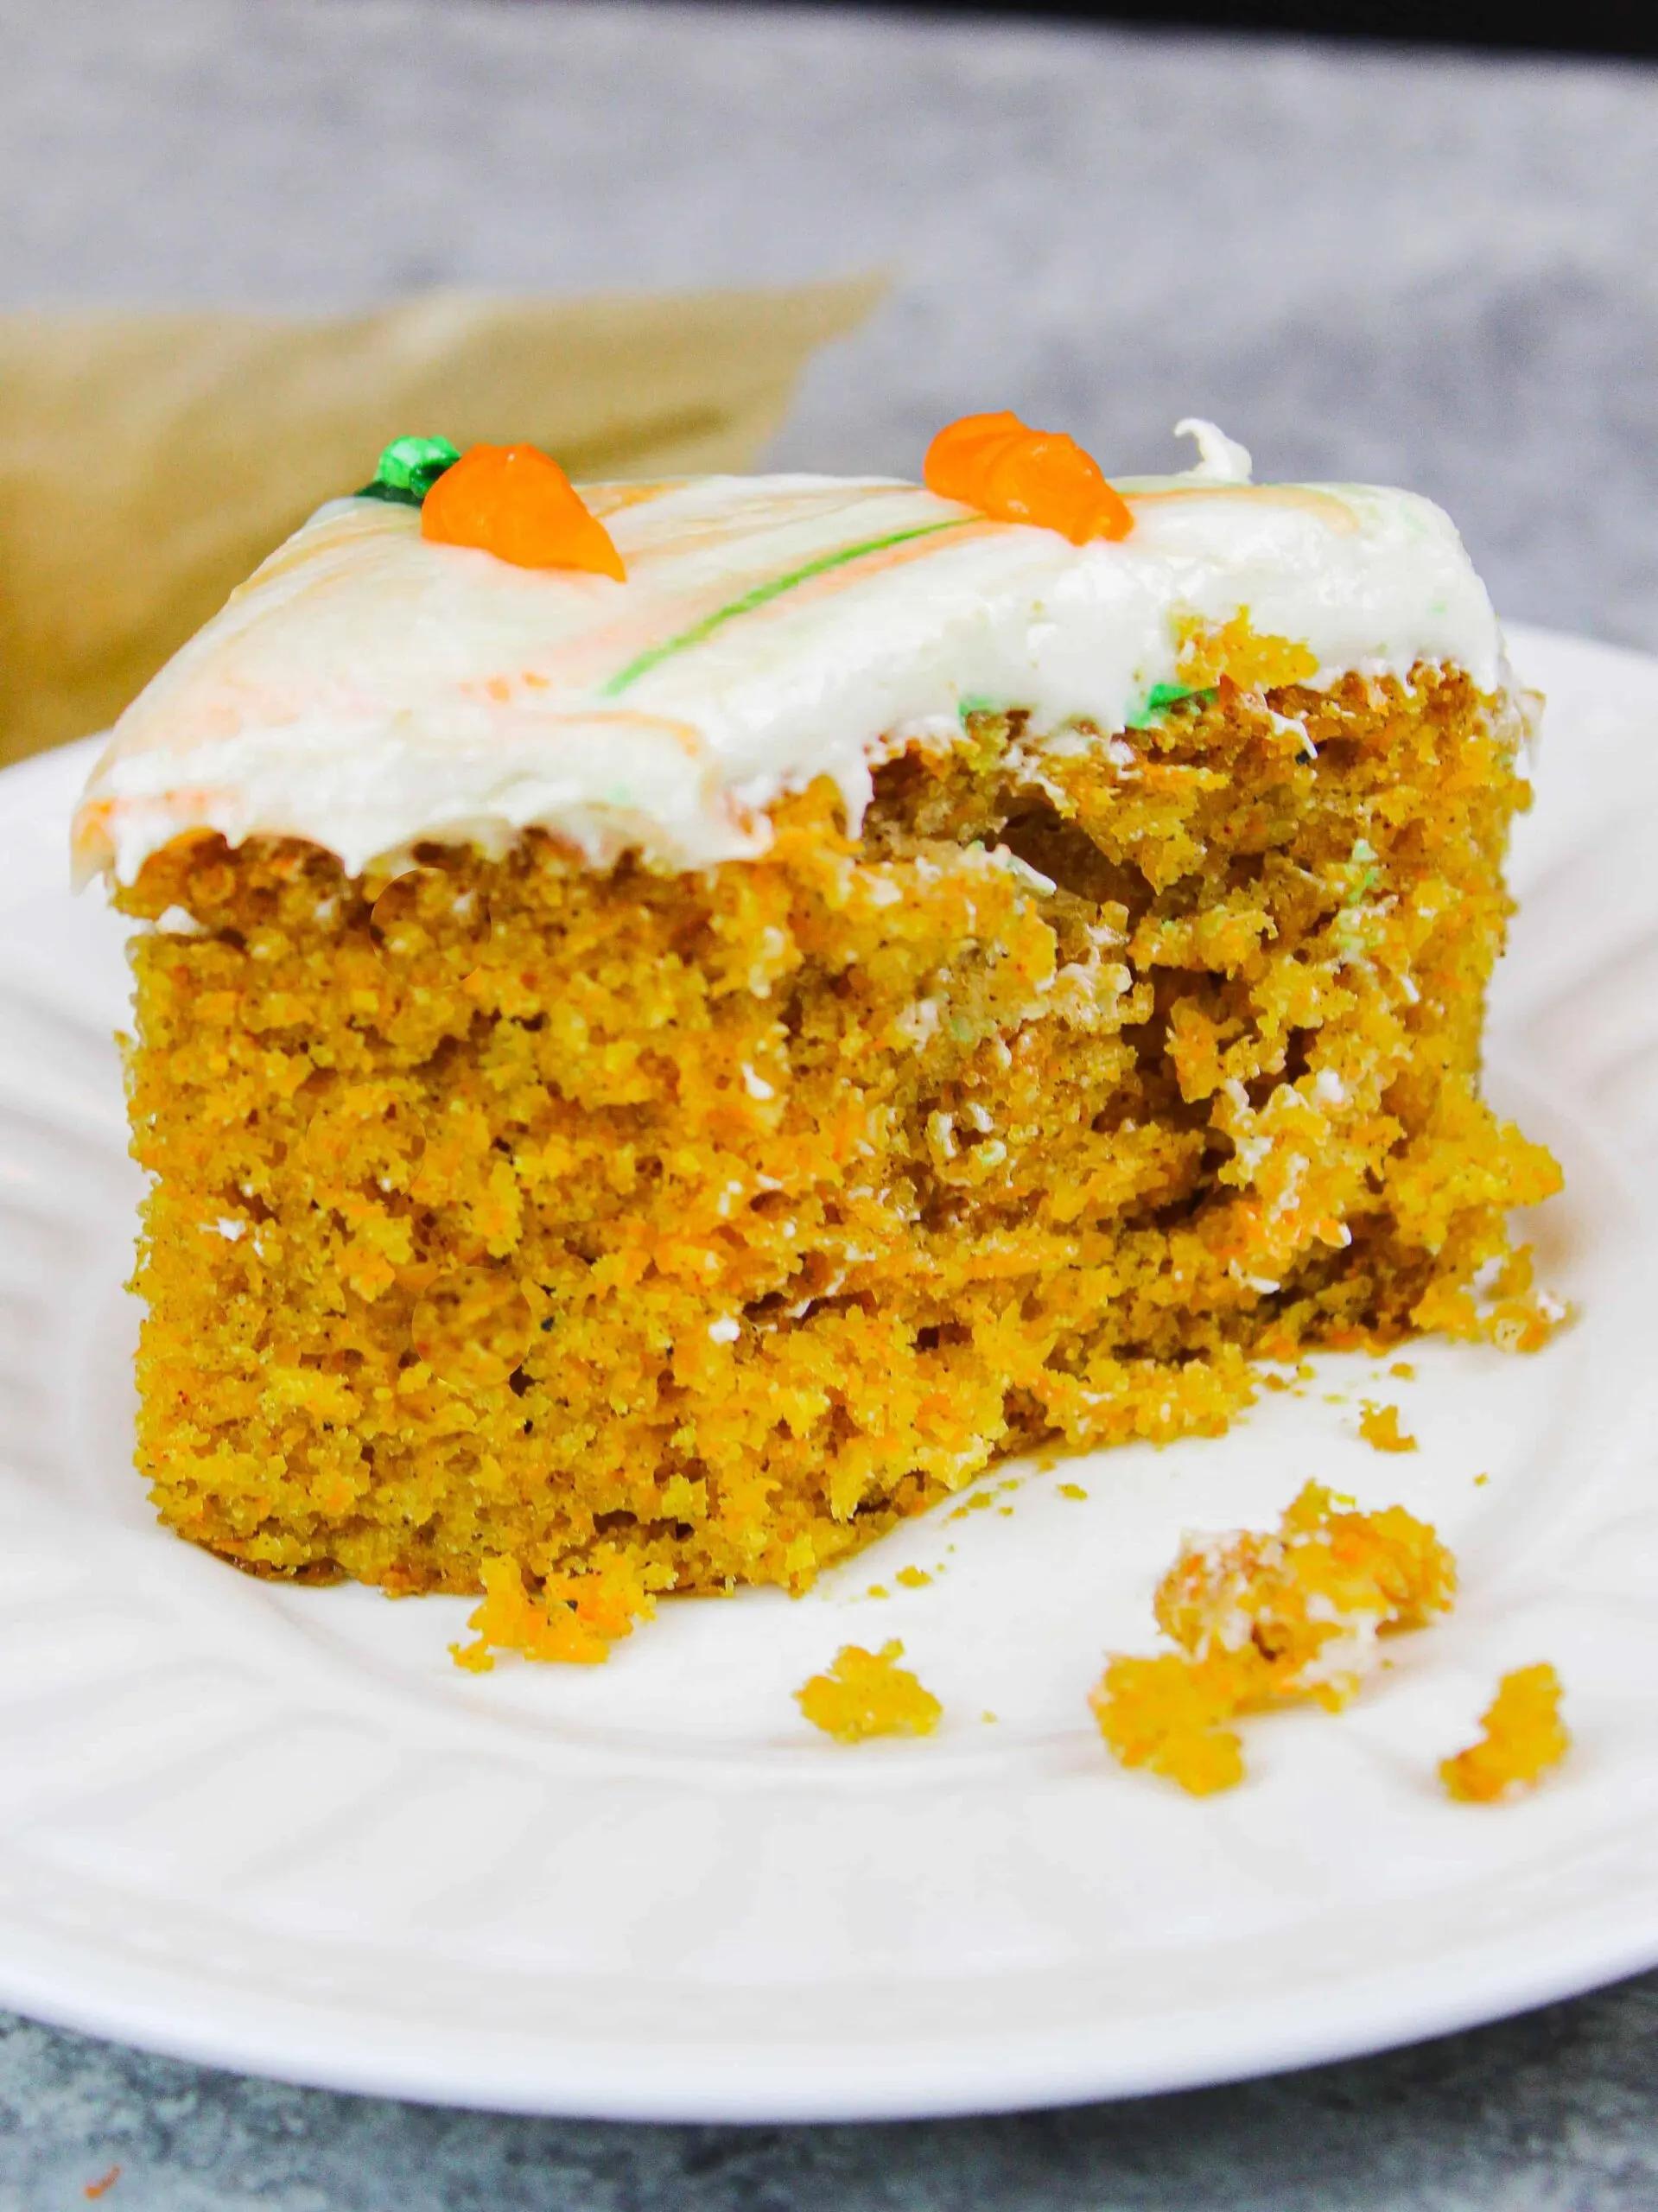 Sheet Pan Carrot Cake with Cream Cheese Frosting Recipe